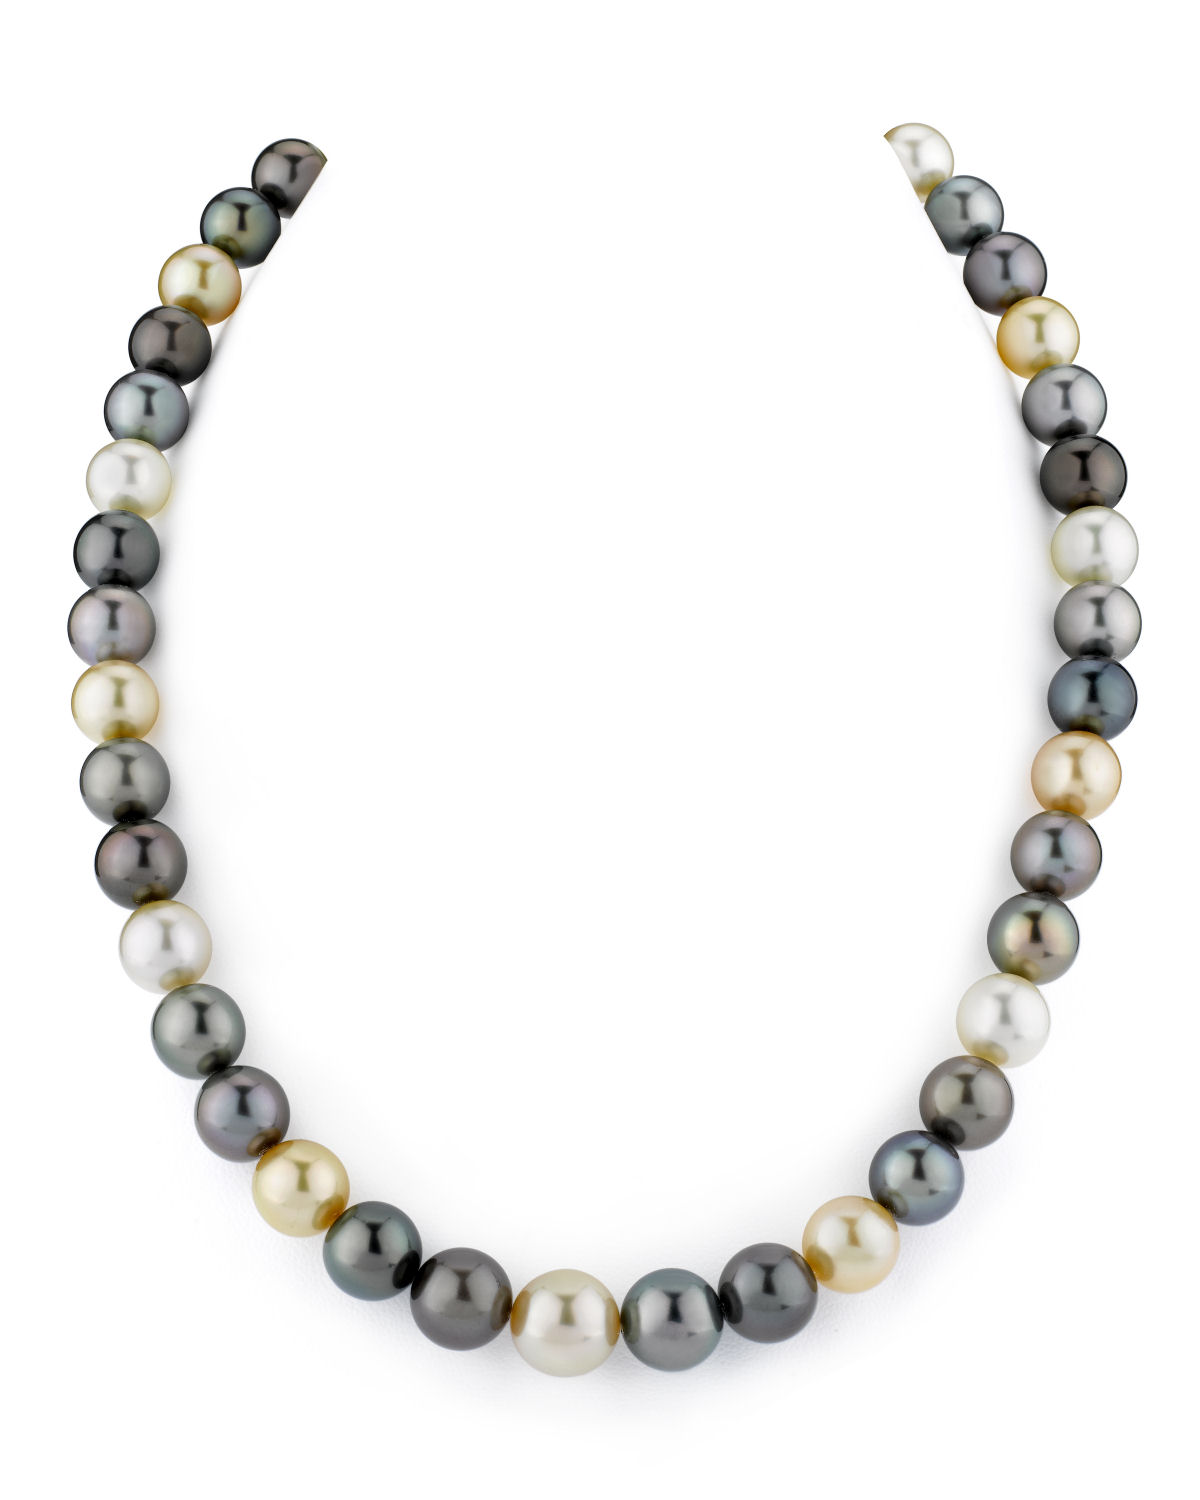 8-10mm Tahitian & Golden South Sea Multicolor Pearl Necklace - AAAA Quality